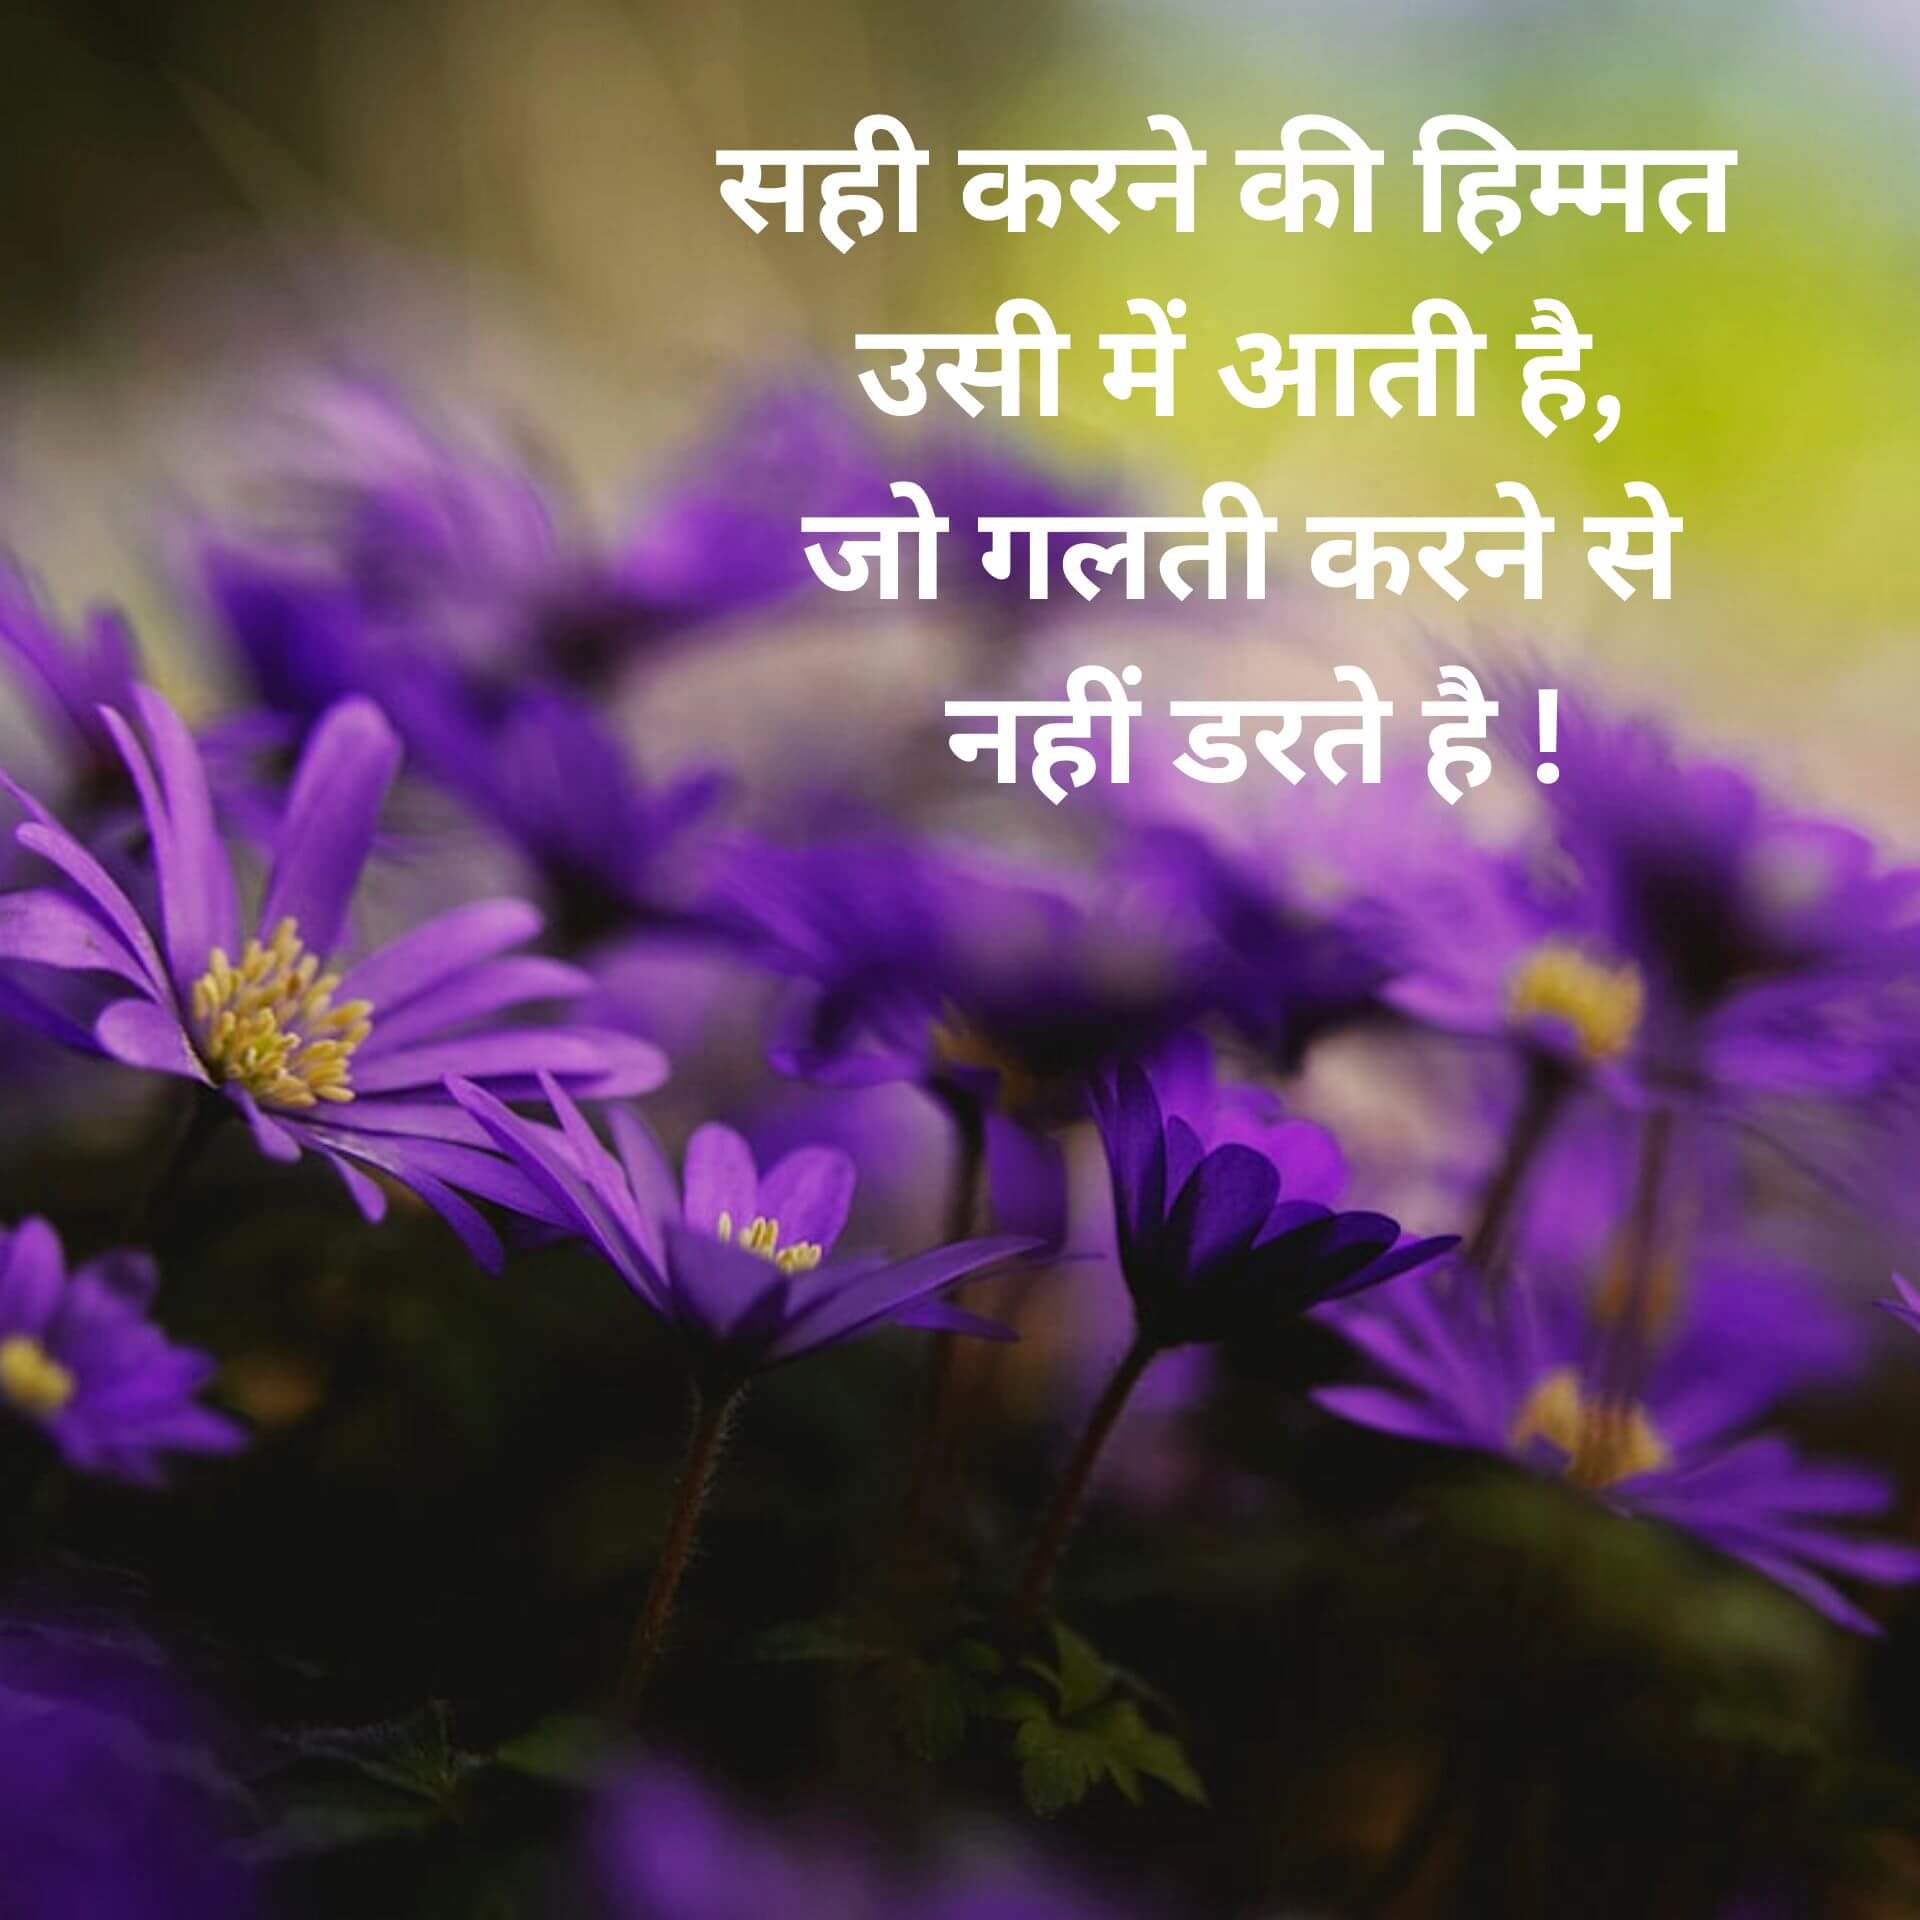 Hindi Motivational Quotes Wallpaper Downnload for Friend